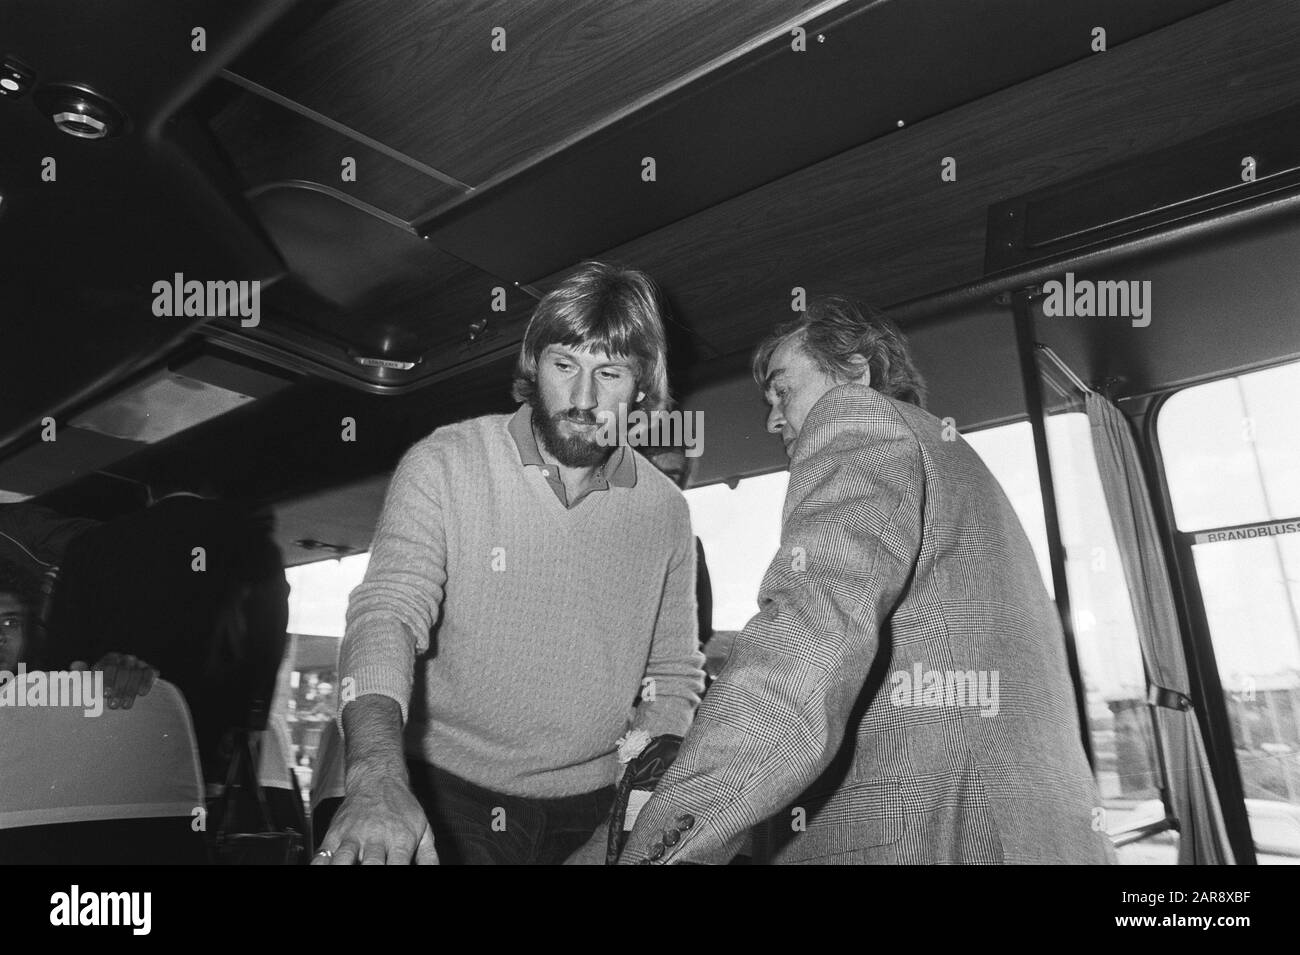 Arrival HSV Hamburg at Schiphol in connection with Europa Cup III match  Trainer Ernst Happel with (left) Manfred Kaltz Annotation: On transit to Athens where the final against Juventus would take place Date: 29 September 1981 Location: Noord-Holland, Schiphol Keywords: trainers, footballers Personal name: Happel, Ernst, Kaltz, Manfred Stock Photo